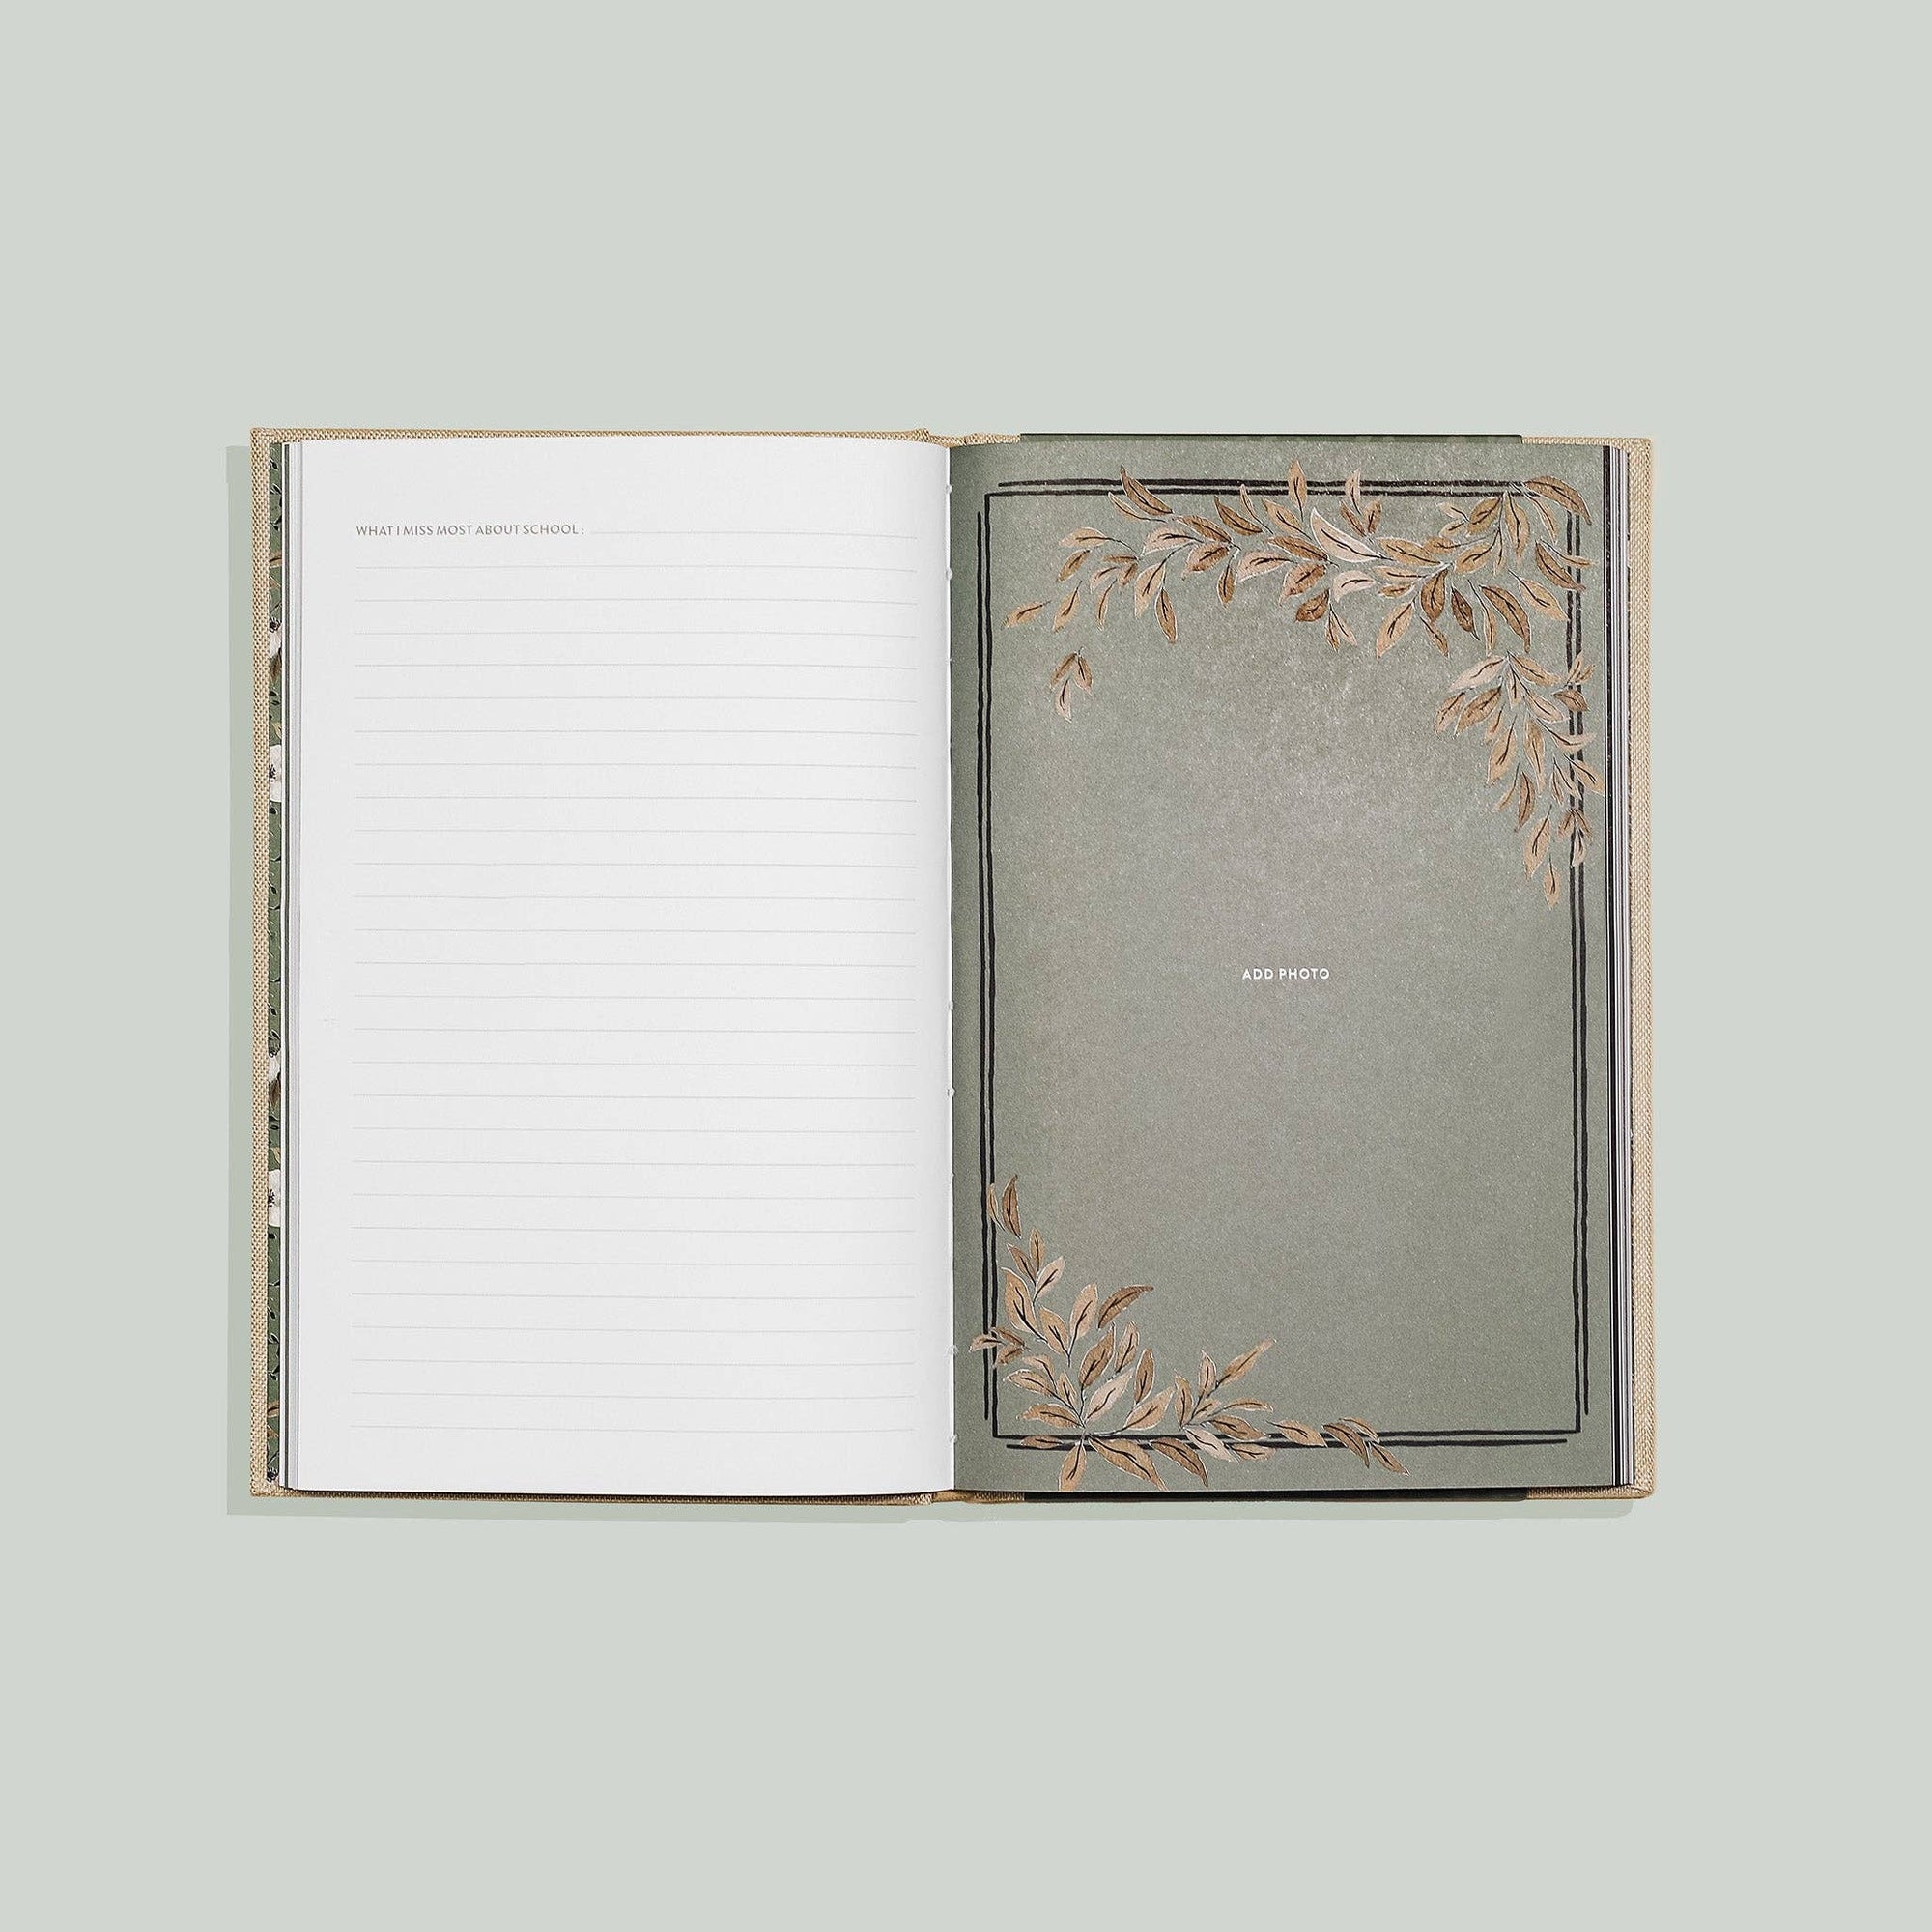 Grandma's Story: A Memory and Keepsake Journal for My Family with a green cover and leaves on it, perfect as a heartfelt gift for grandma.